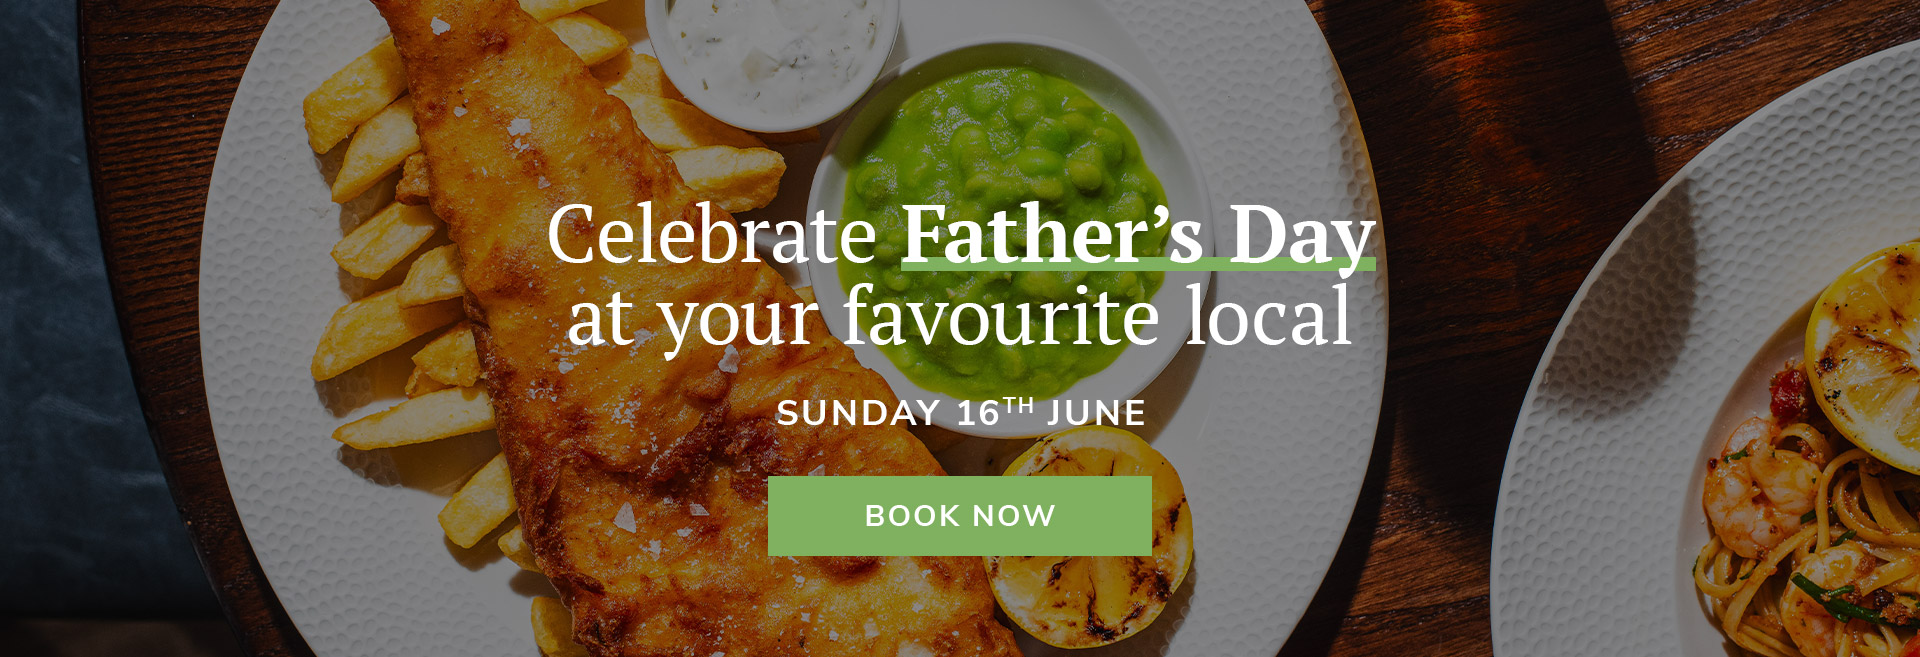 Father's Day at The Crown & Sceptre